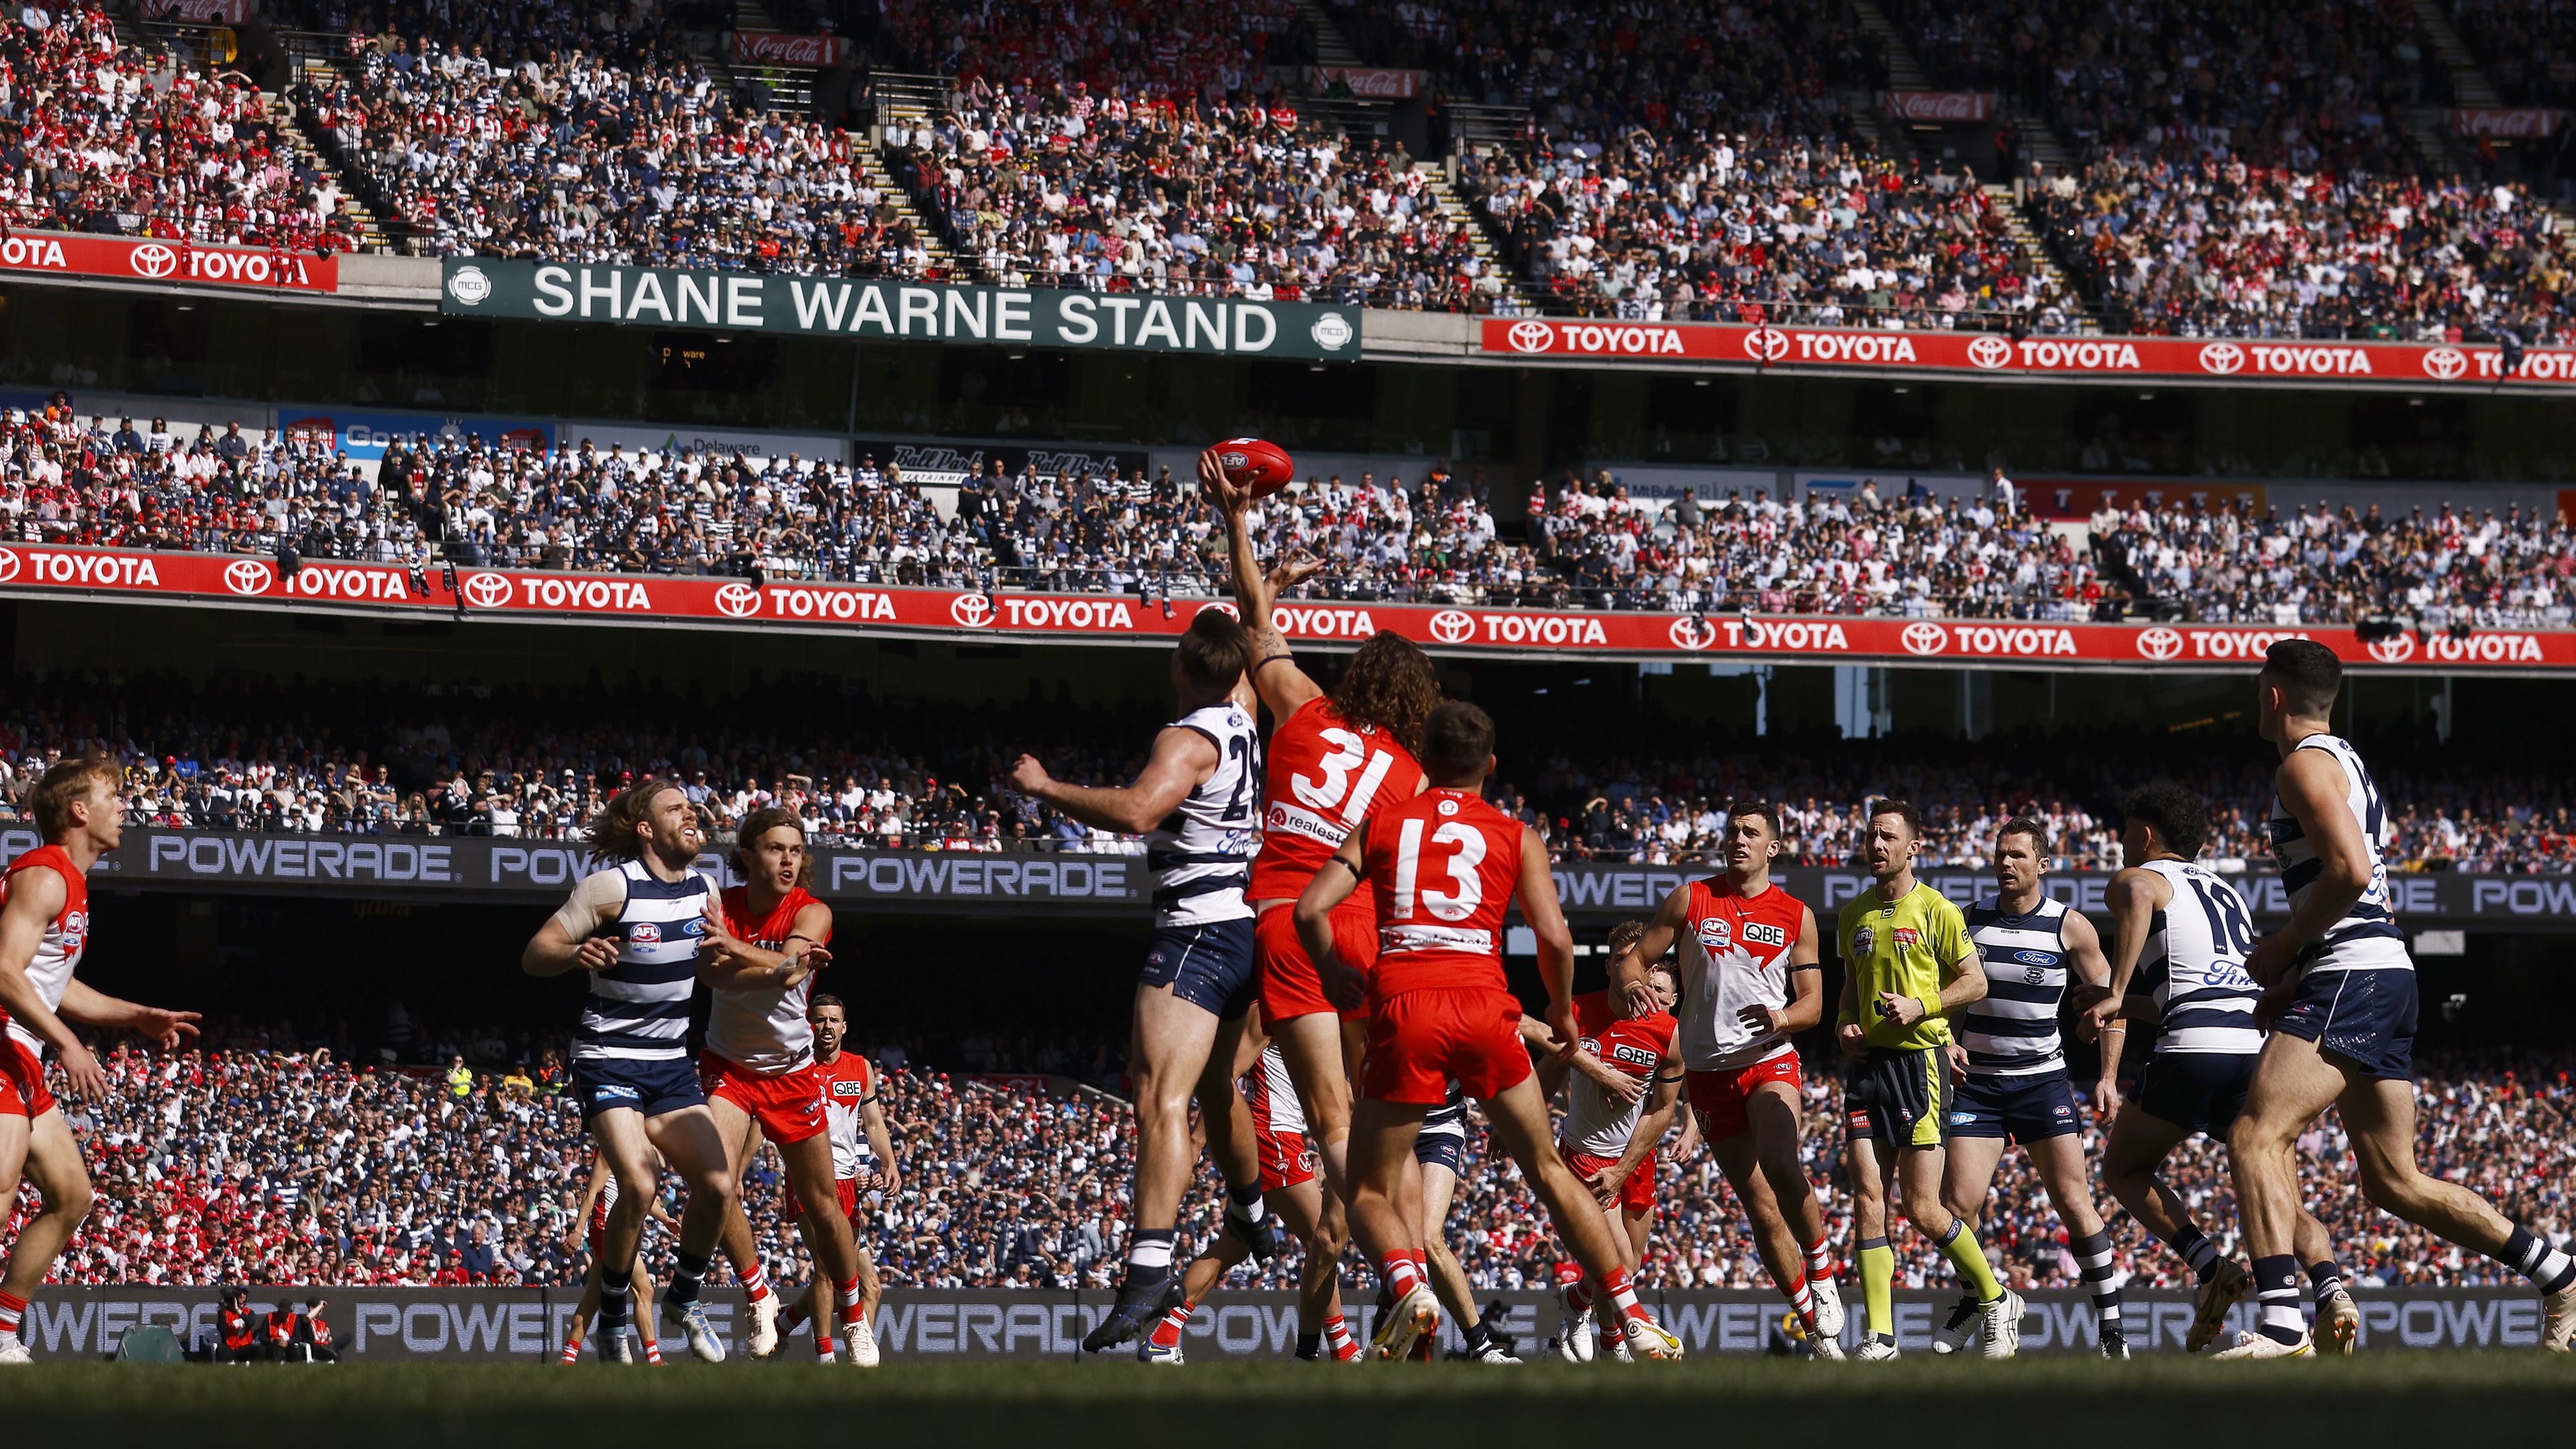 Fan survey reveals overwhelming support for afternoon AFL grand final